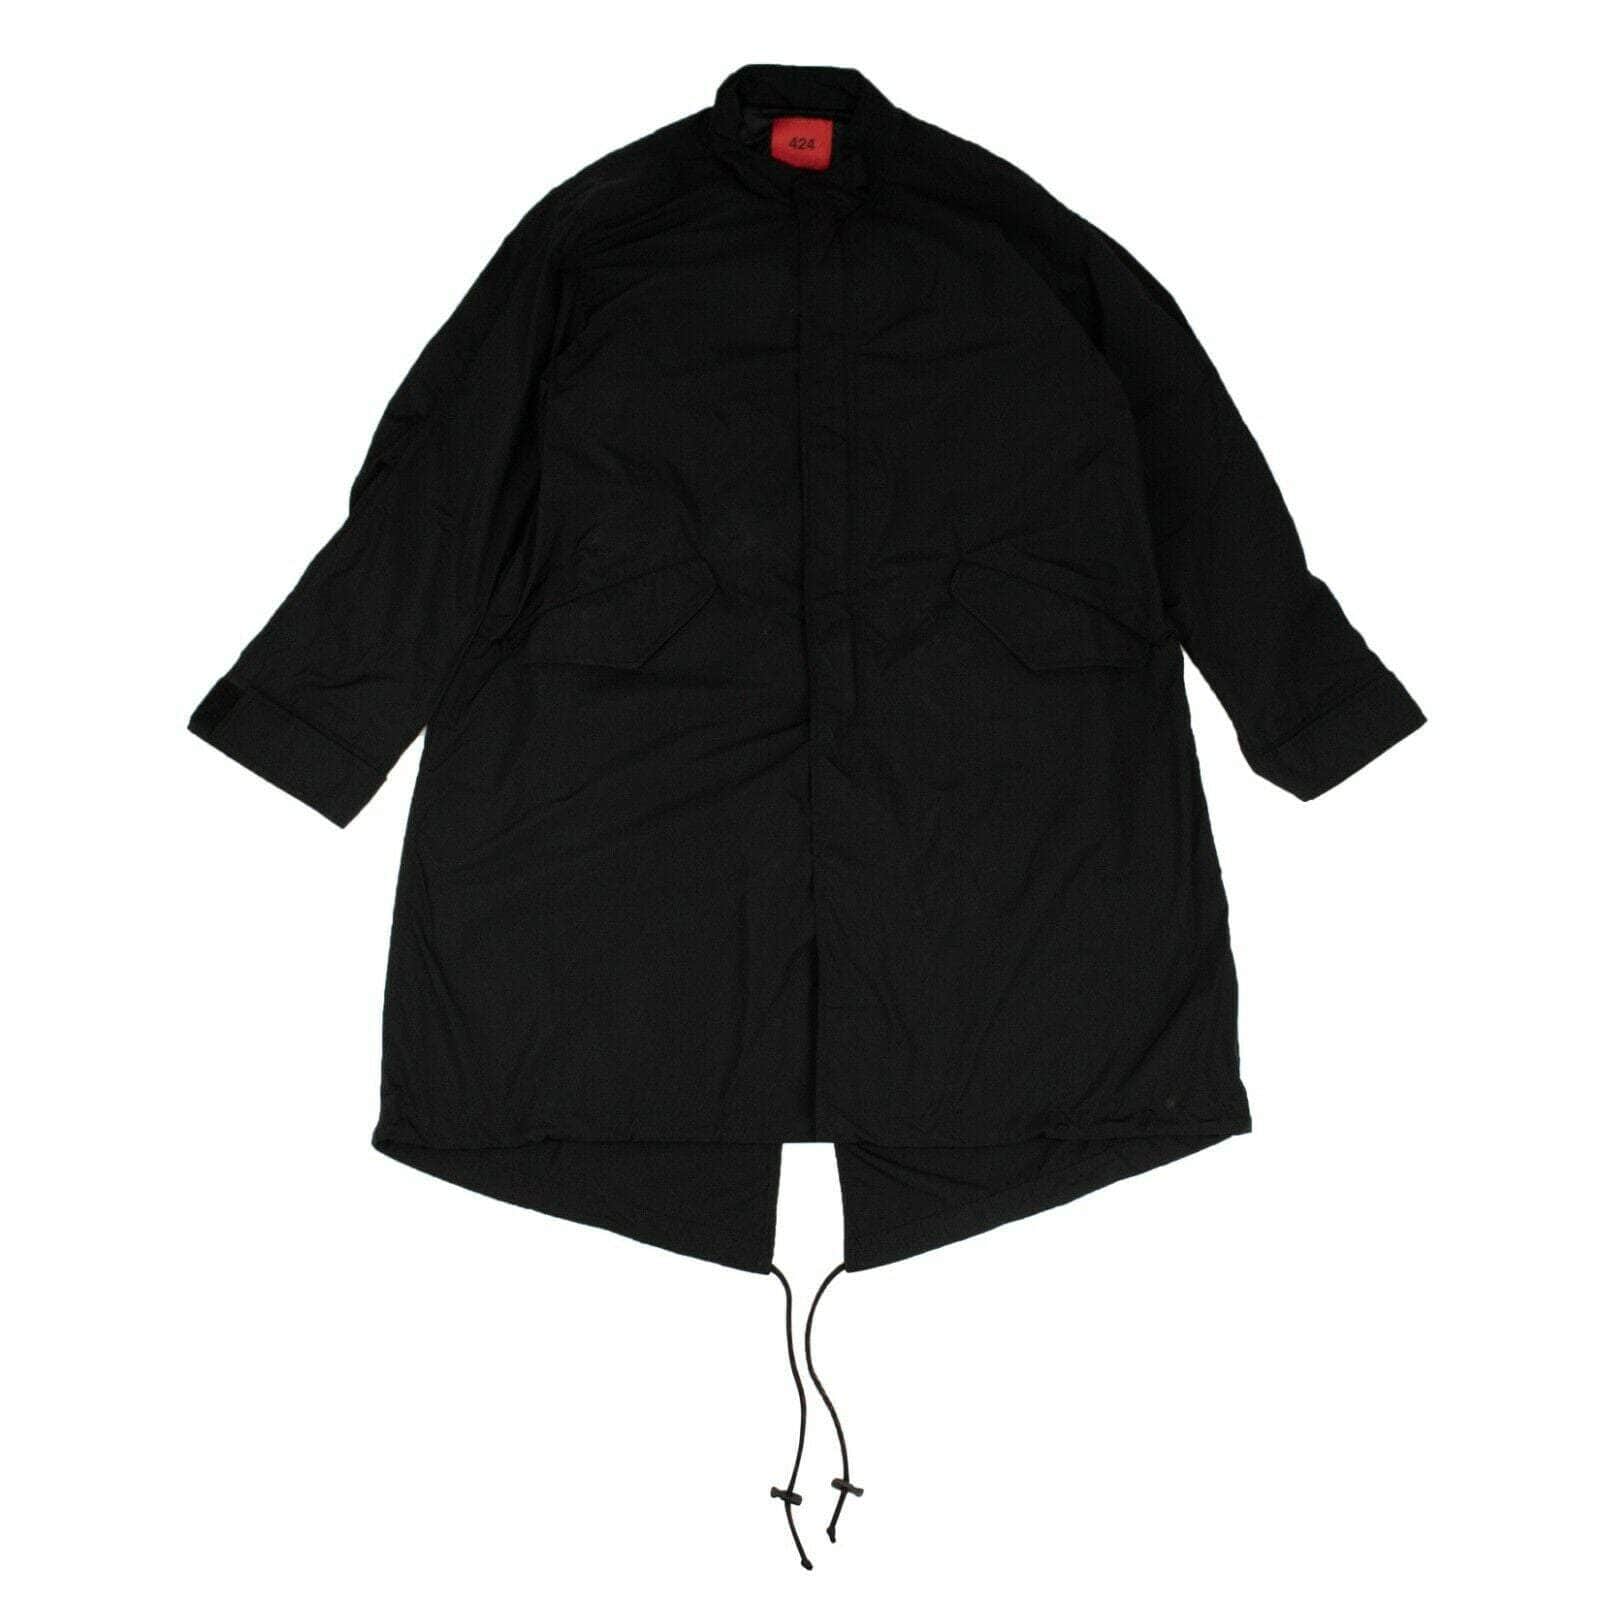 424 ON FAIRFAX 424-on-fairfax, 500-750, channelenable-all, chicmi, couponcollection, gender-mens, main-clothing, mens-field-jackets, size-l Black Long Jacket